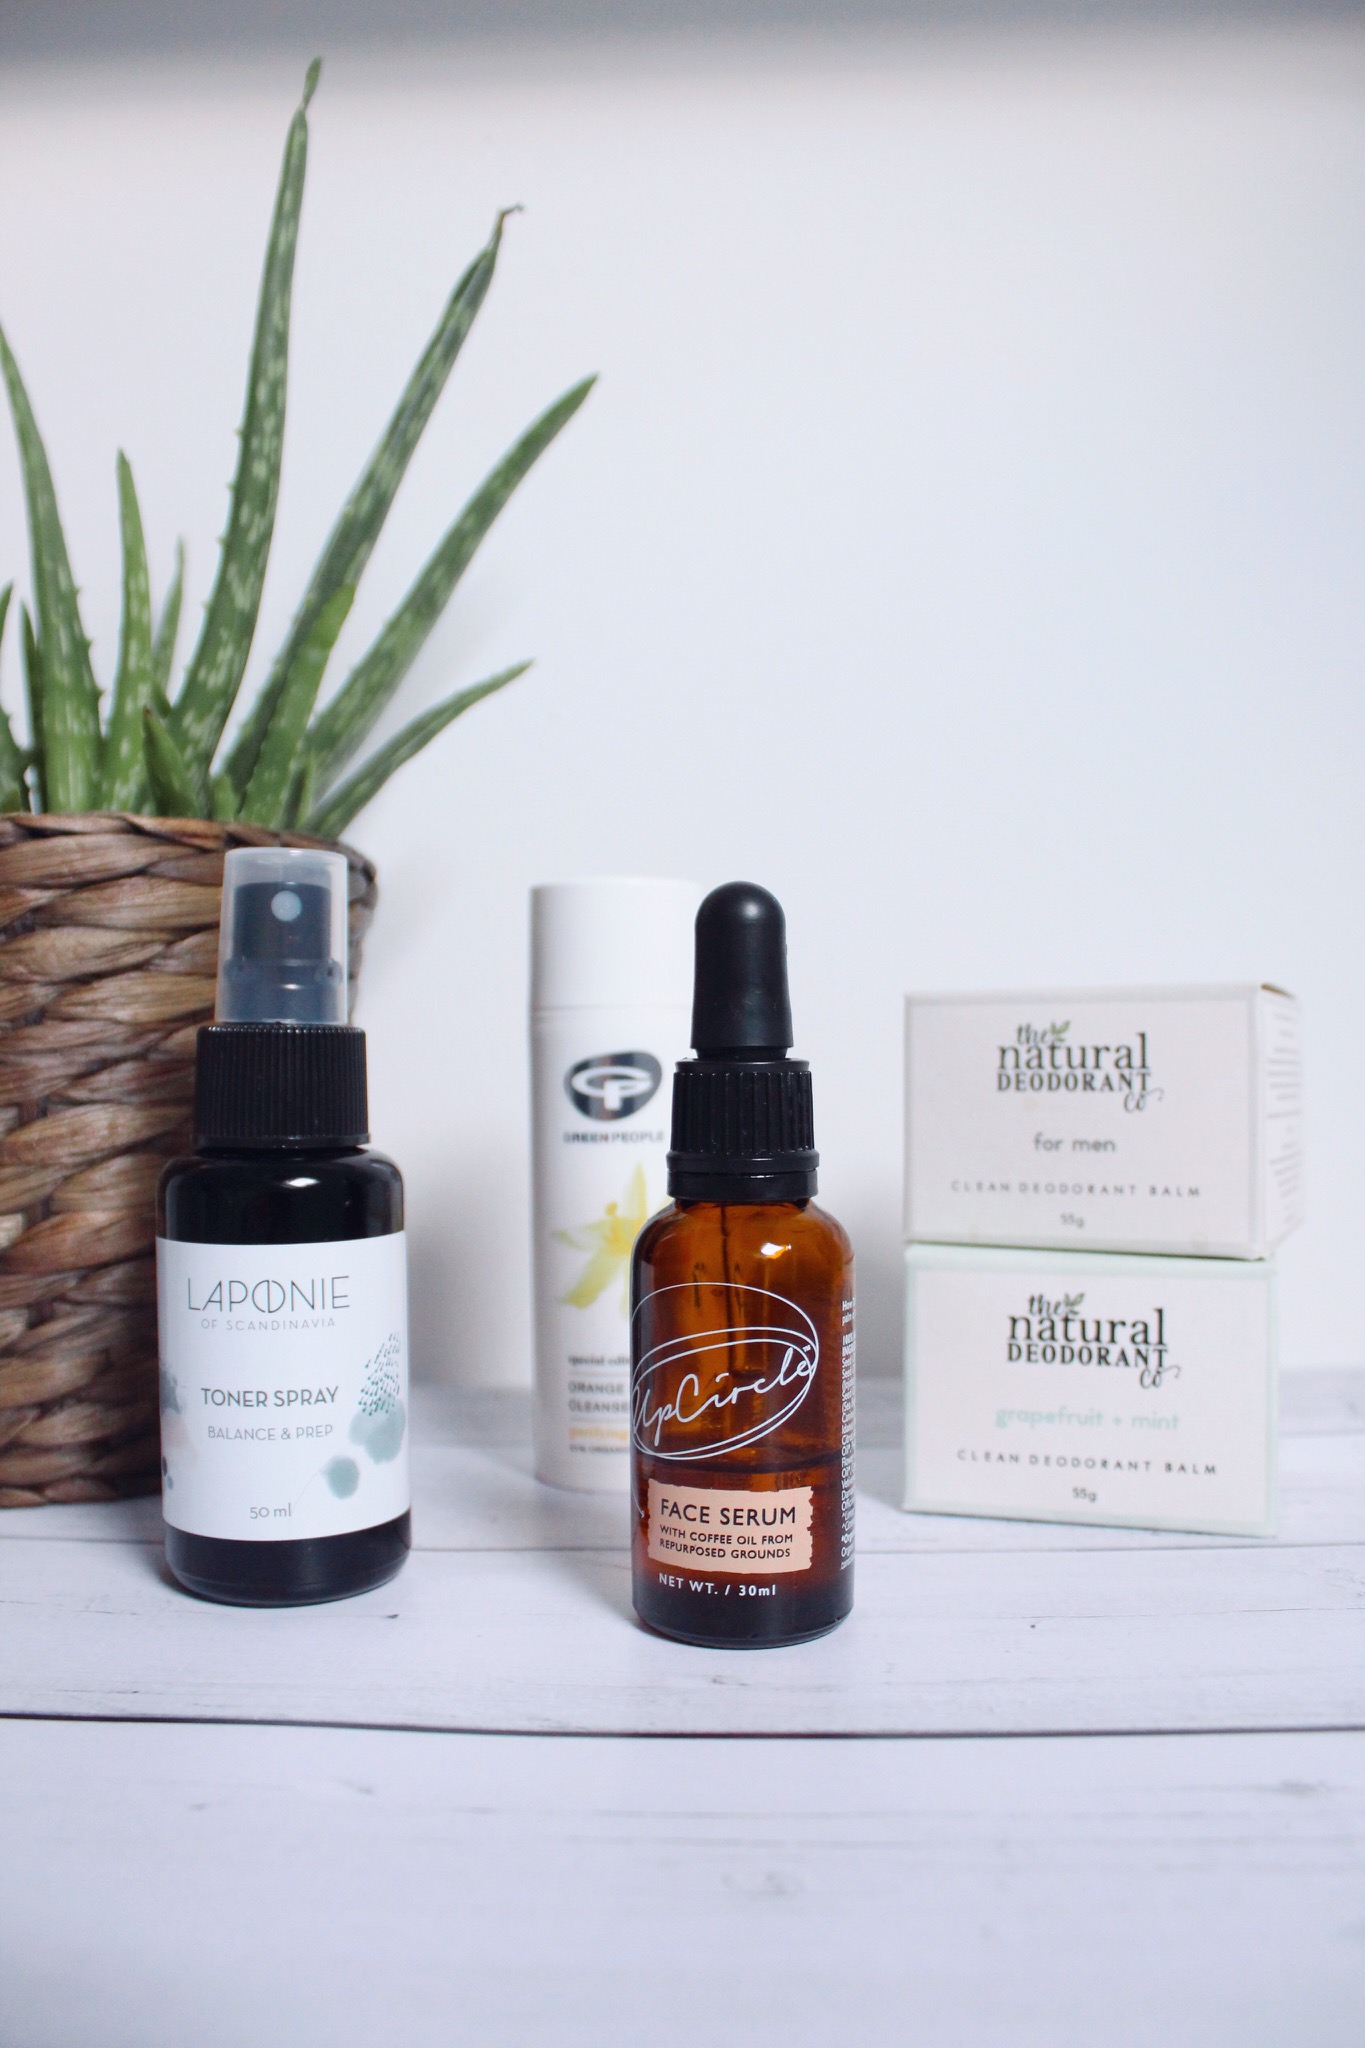 Three things to look out for in sustainable skincare